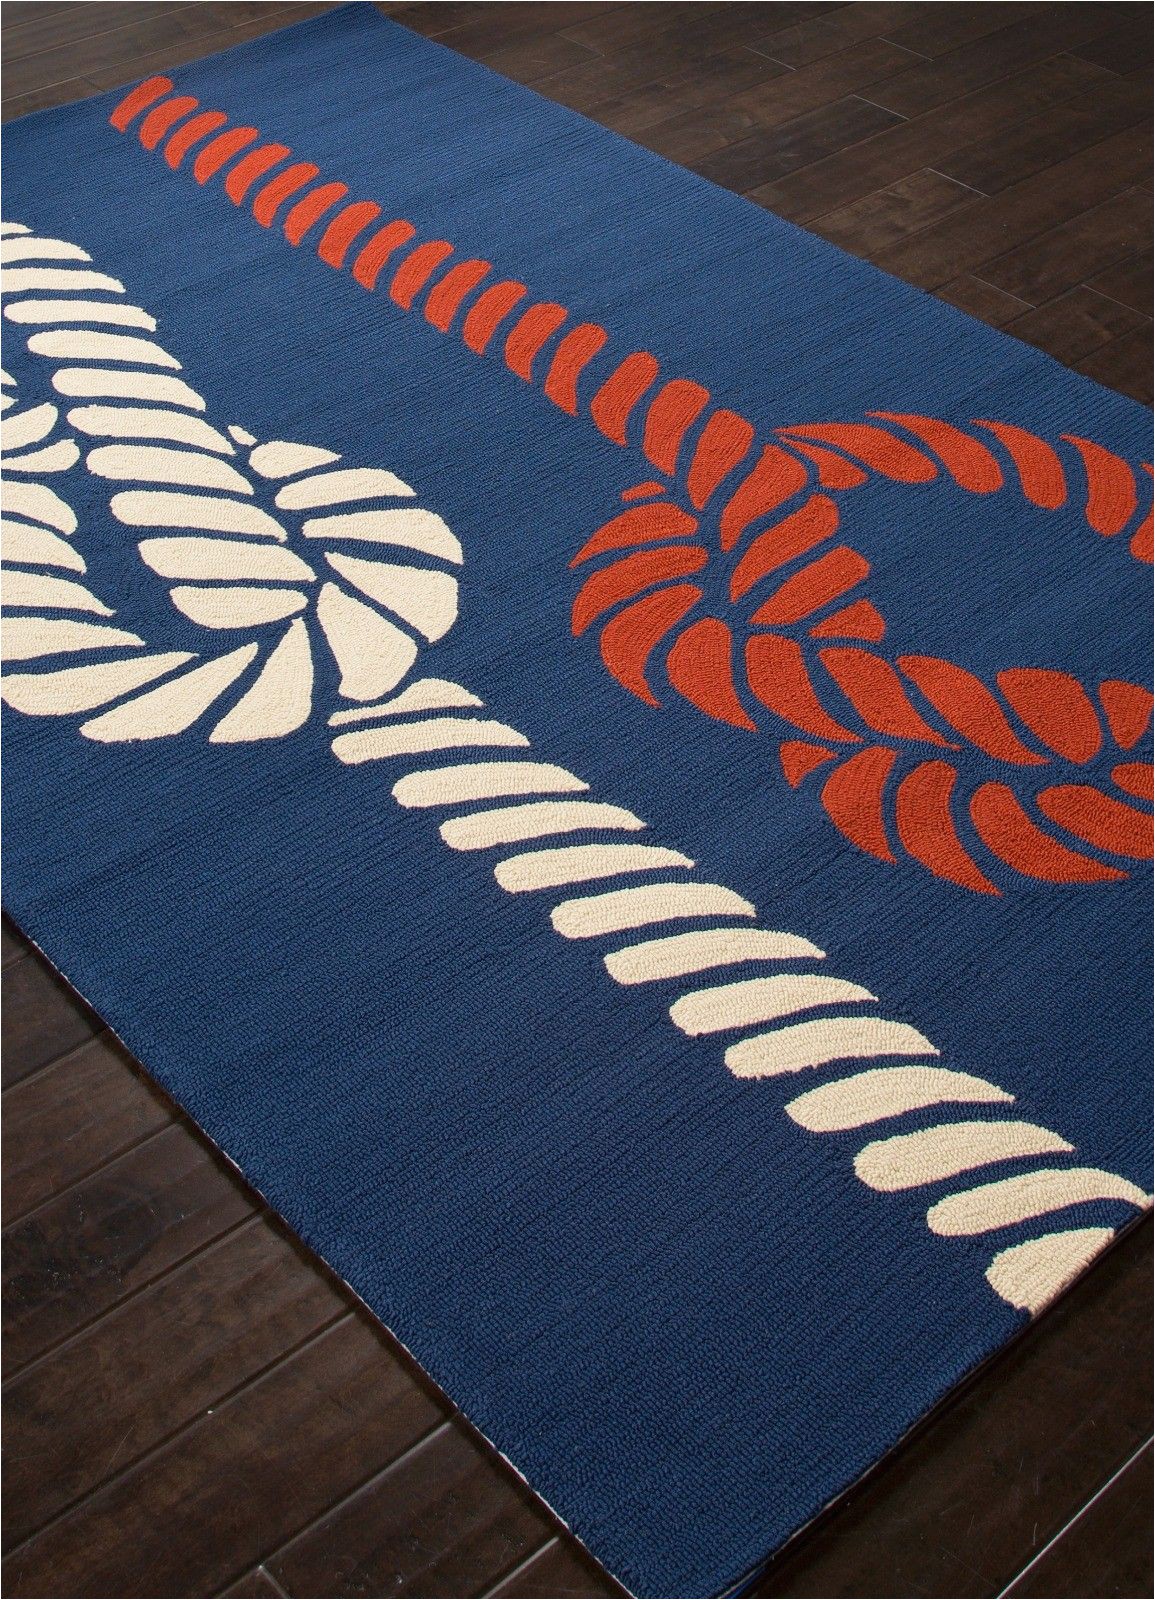 Navy Blue and Red area Rugs Sea Knotty Navy Blue Red and White area Rug